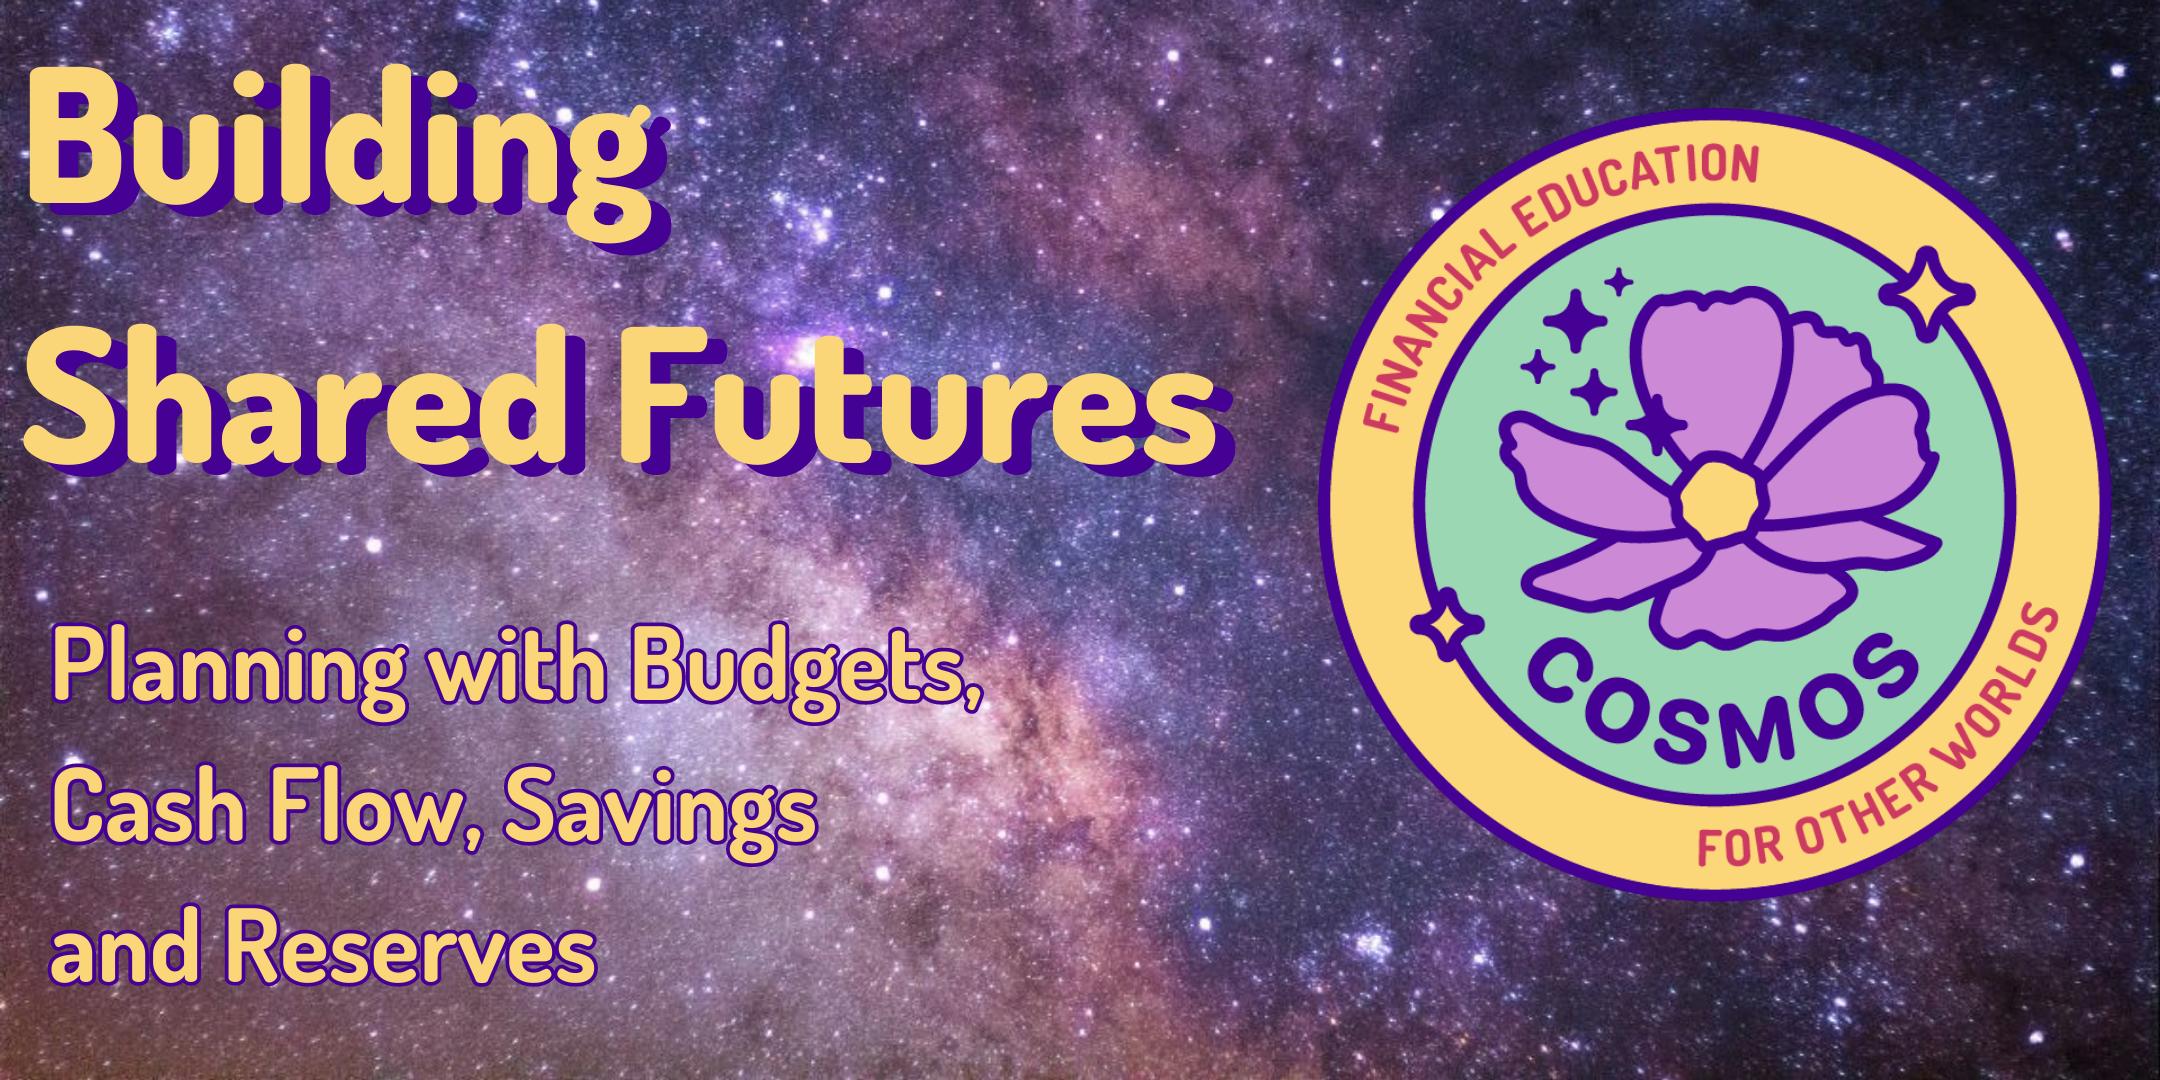 Text reads "Building Shared Futures: Planning with Budgets, Cash Flow, Savings and Reserves" against a purple, pink, and blue starry night sky with Cosmos flower logo.